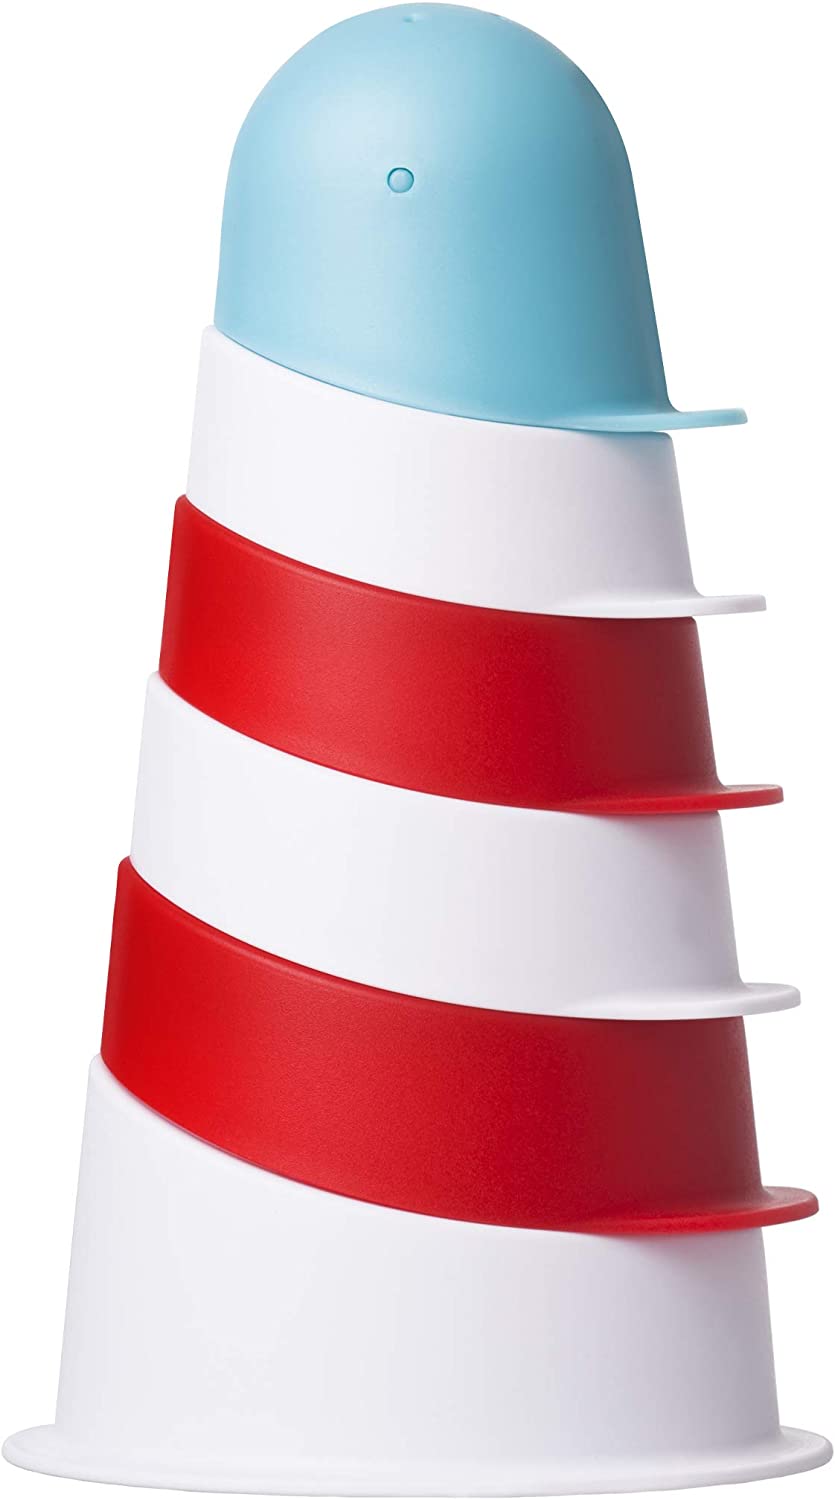 Ubbi | Lighthouse Bath Stacking Cups